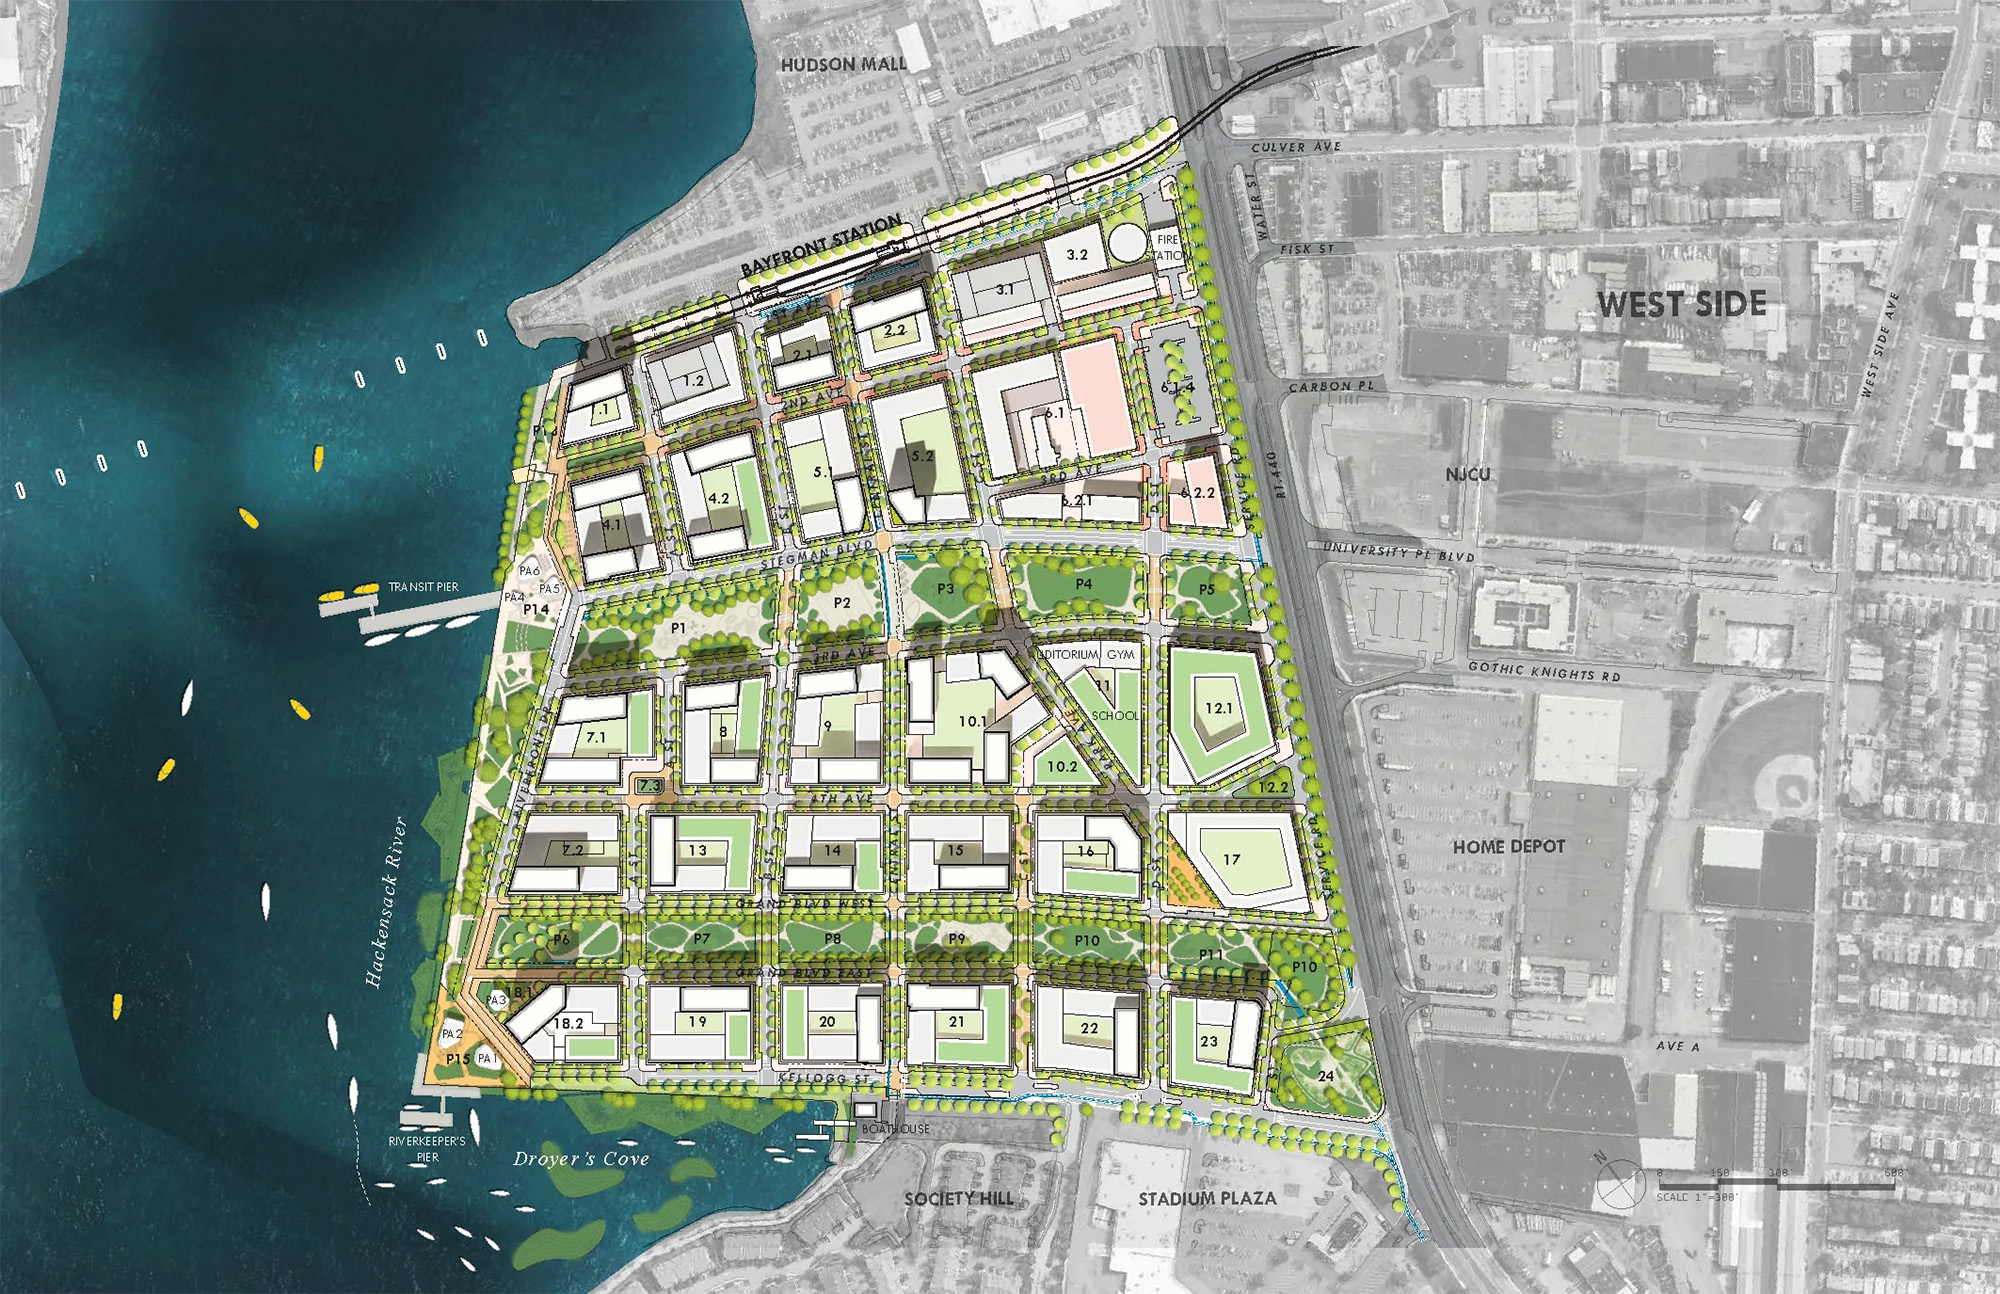 A site plan for the new Bayfront development in Jersey City, NJ